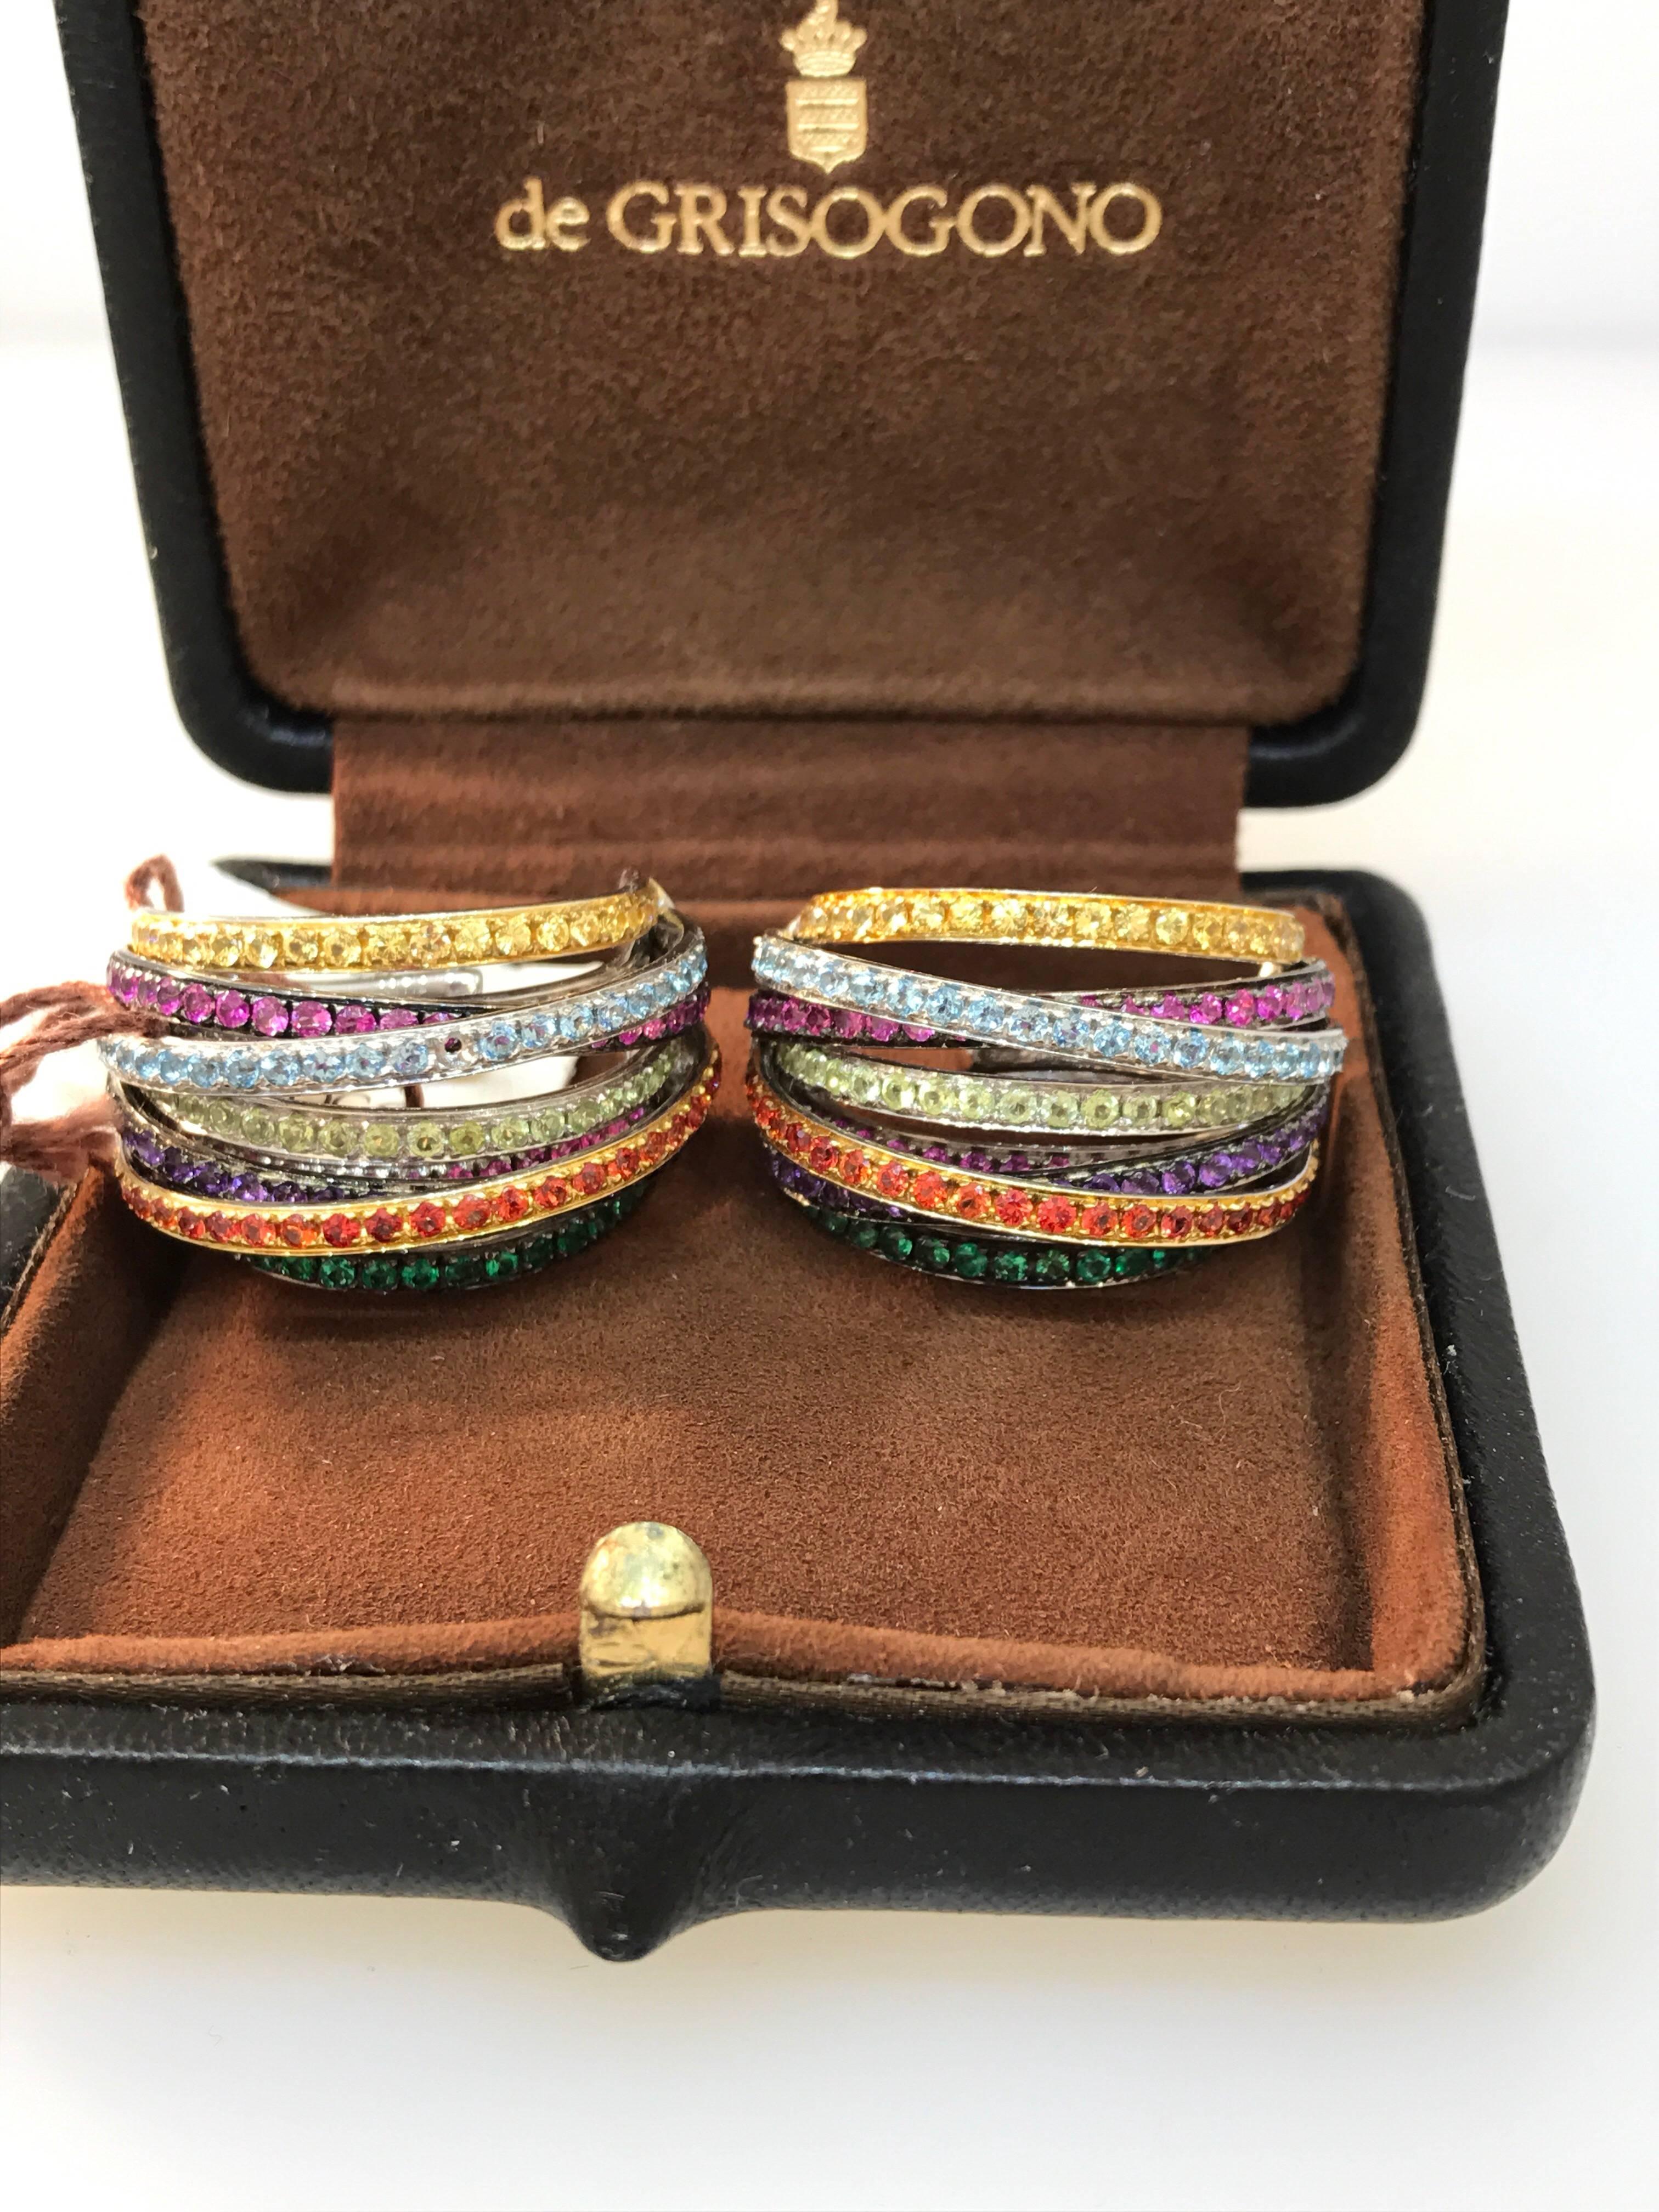 De Grisogono Allegra Earrings

Model Number 14022/08

100% Authentic

New / Old Stock

Comes with a generic earrings box

18 Karat white gold

Earrings set with multiple colored stones

Can fasten as butterfly or just clip-on

Retails for $32,900